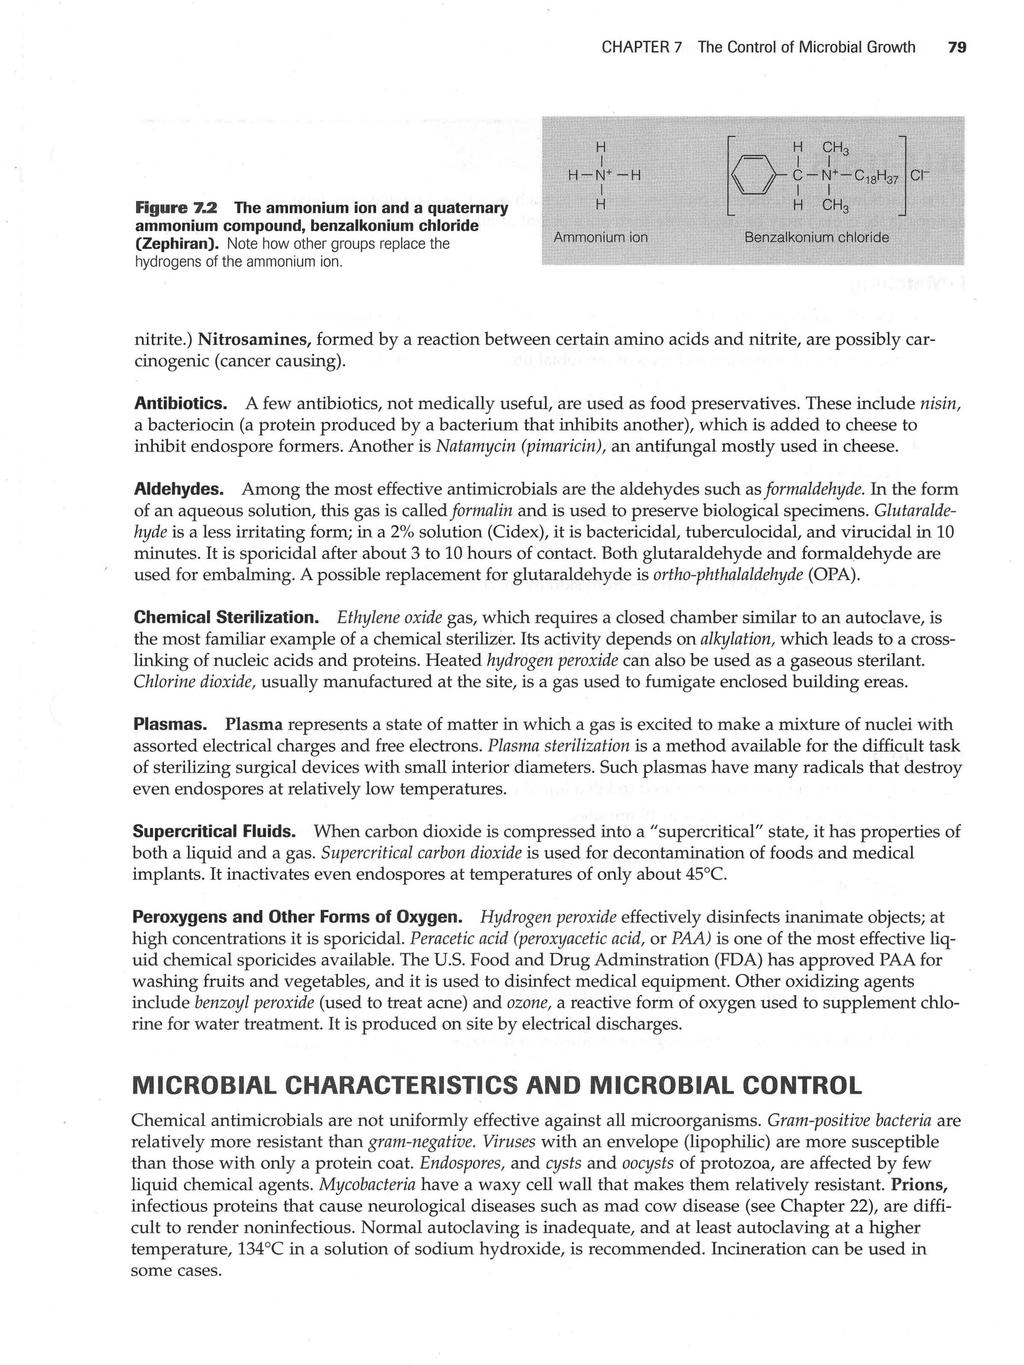 , CHAPTER 7 The Control of Microbial Growth 79 Figure 7.2 The ammonium ion and a quaternary ammonium compound, benzalkonium chloride (Zephiran).